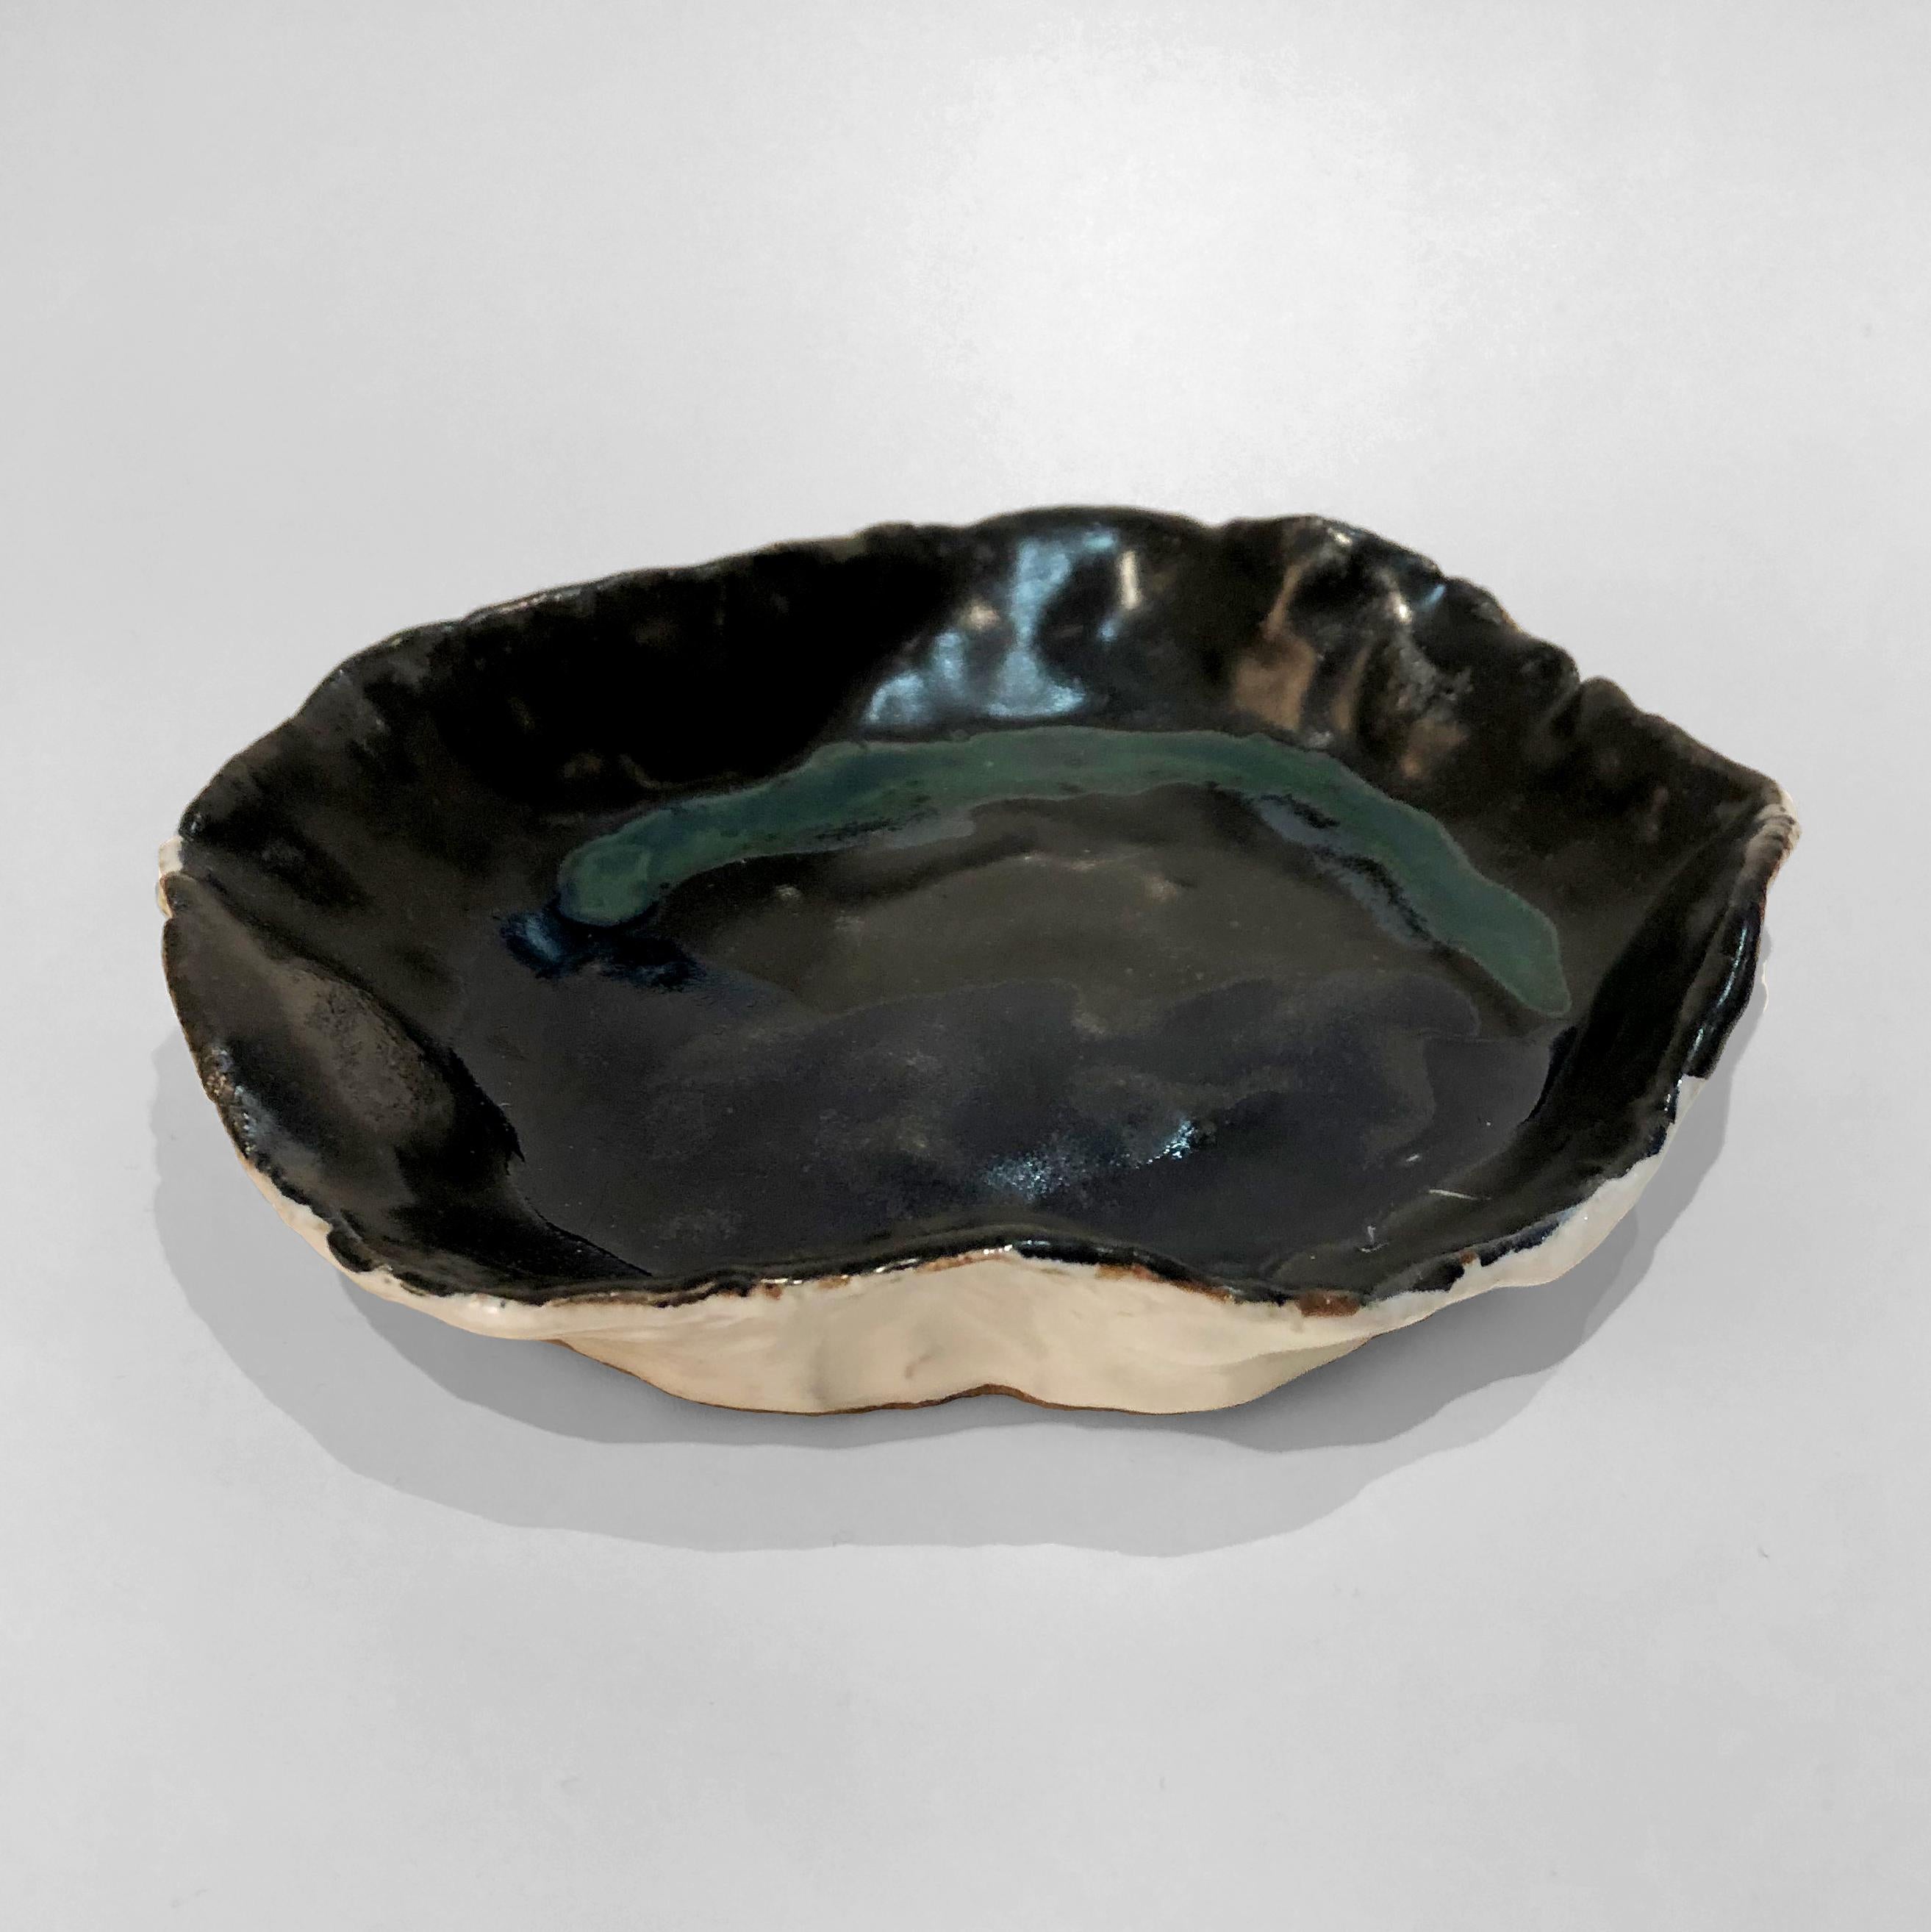 Hand-Crafted Medium Handbuilt Stoneware Ceramic Bowl and Plate by Hannelore Freer